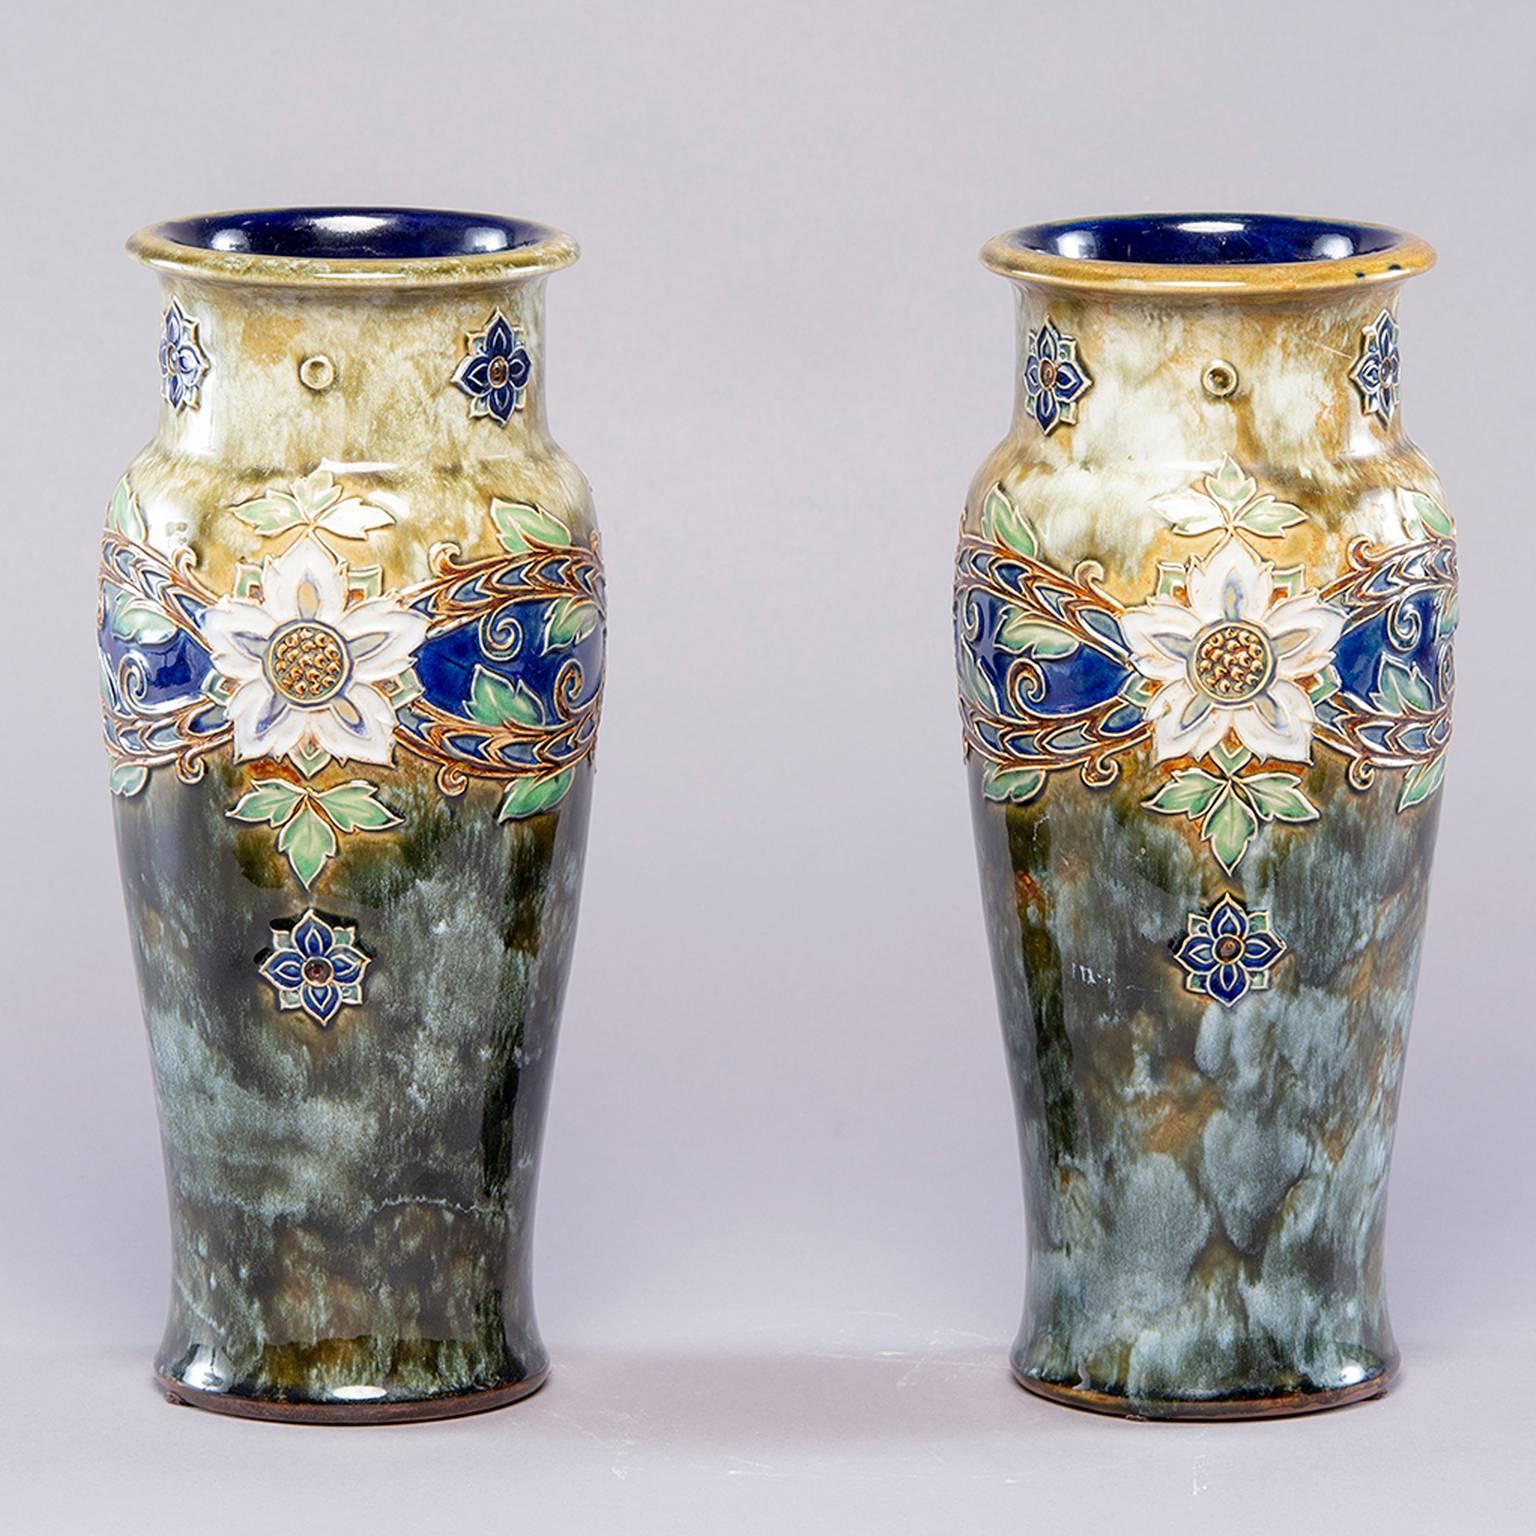 Pair of tall Royal Doulton Lambeth vase by Winnie Bowstead, circa 1920s. These large and striking pieces are decorated in the Art Nouveau style. The Royal Doulton impressed mark is on the underside of the base along with the and the incised initials